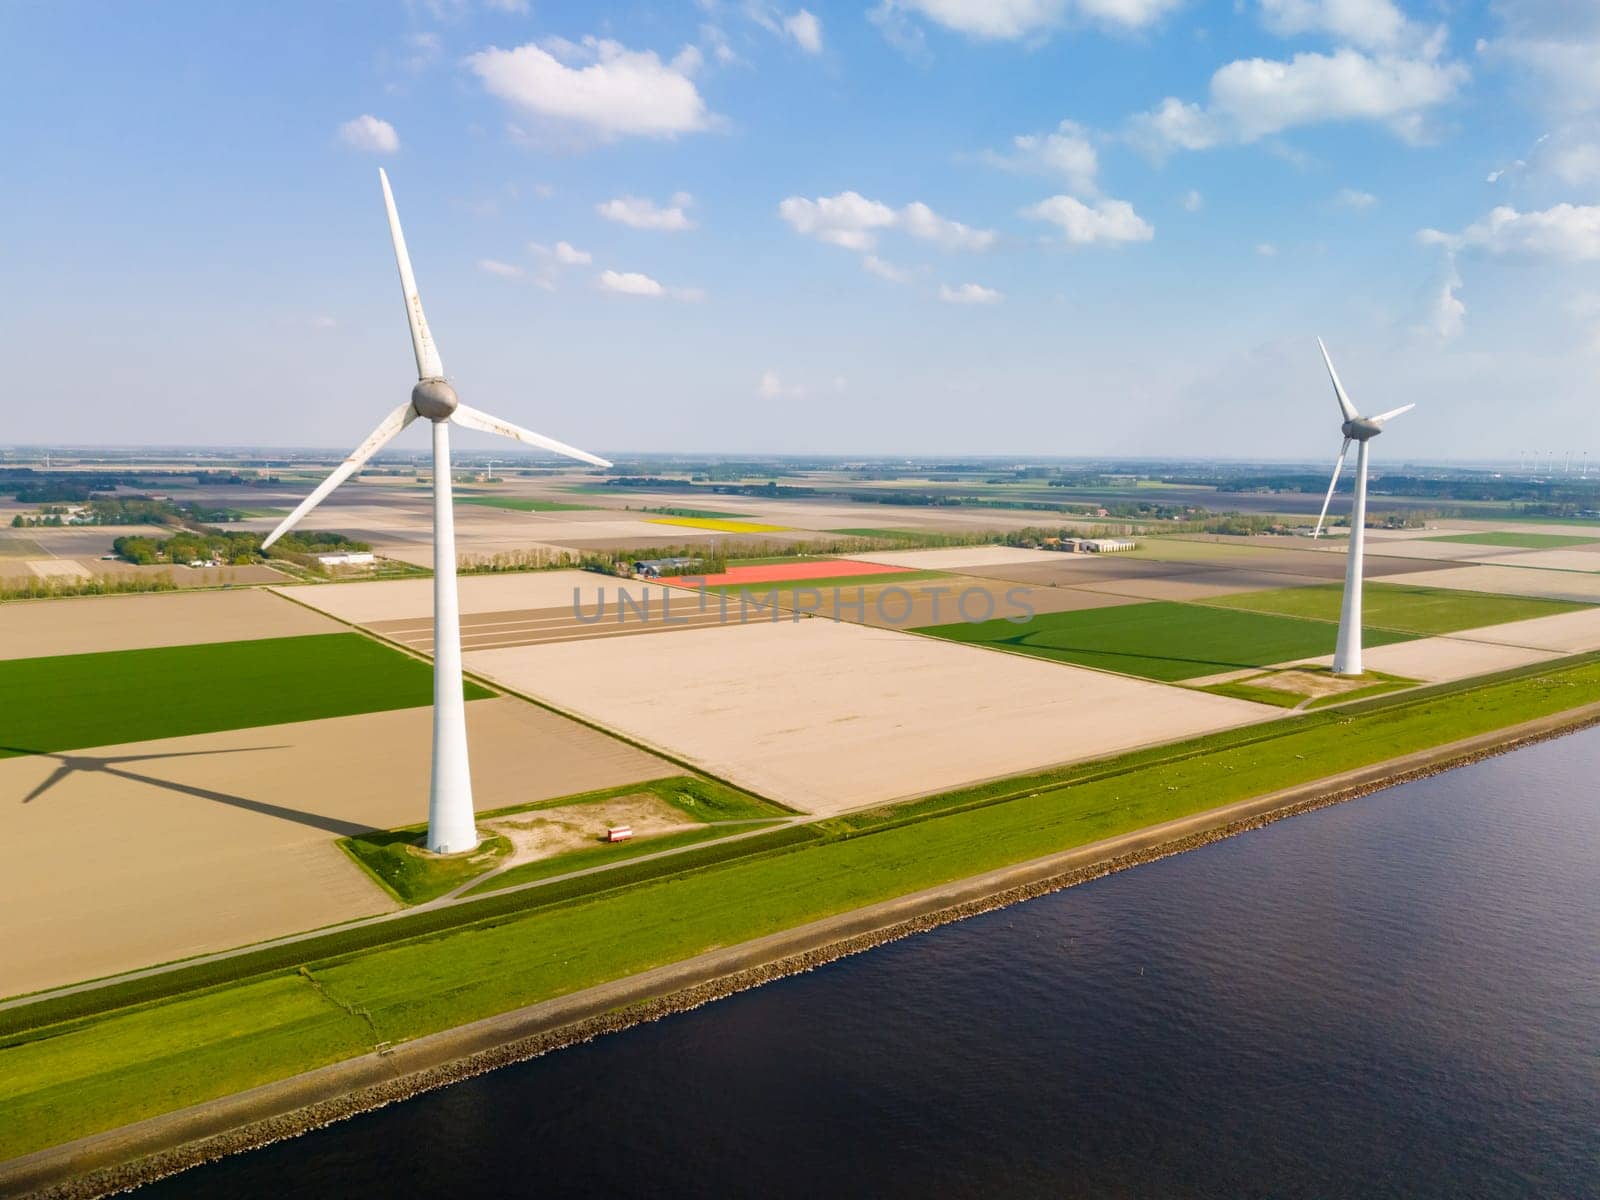 A mesmerizing aerial view of a wind farm in Flevoland, Netherlands, where towering windmills stand gracefully in the wind, generating renewable energy for the region.